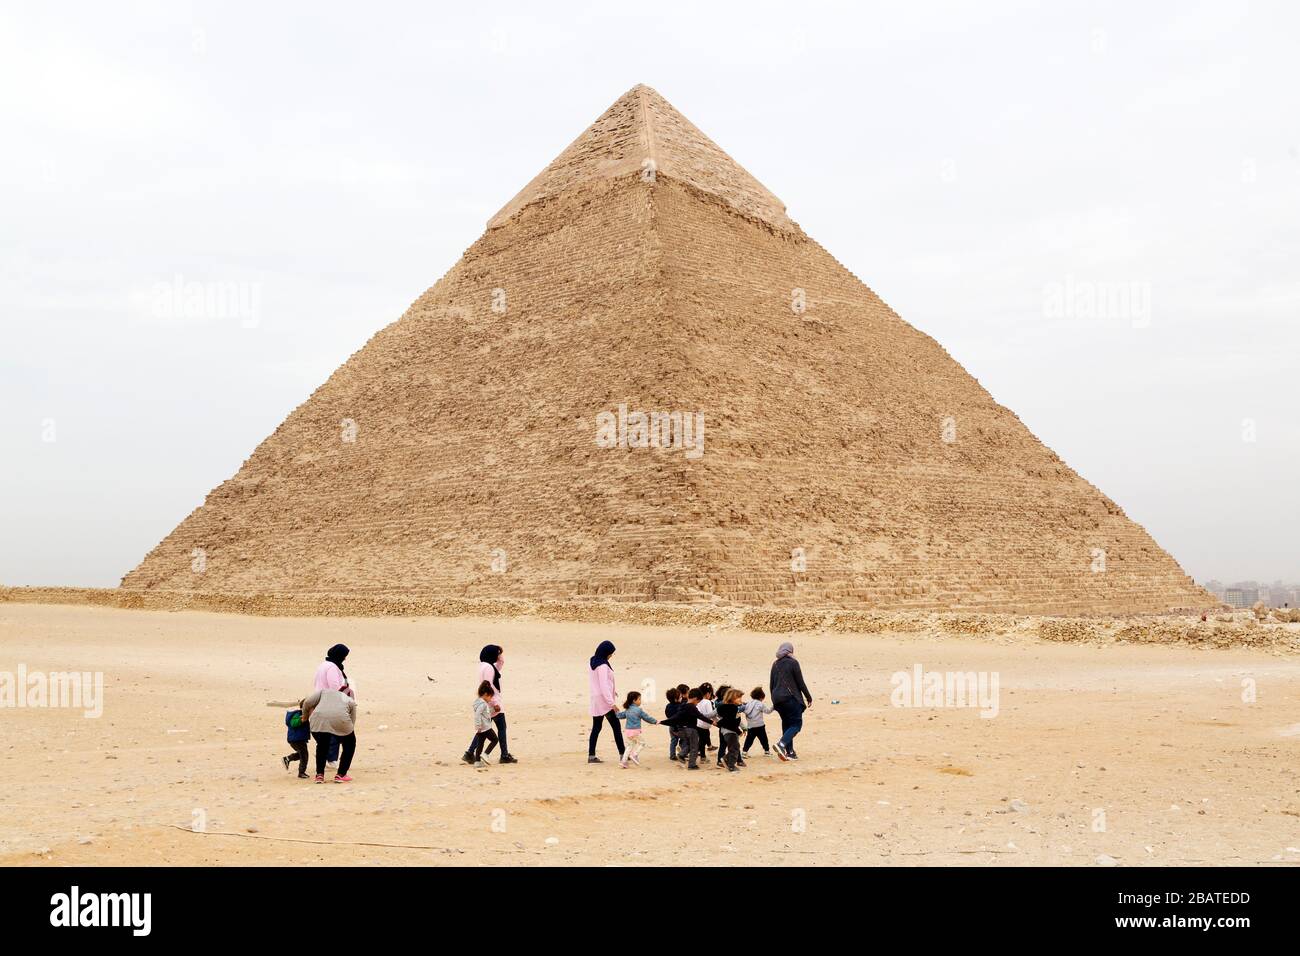 A group of people walks by the Pyramid of Khufu, also known as the Pyramid of Cheops, on the Giza Plateau at Cairo, Egypt. Stock Photo